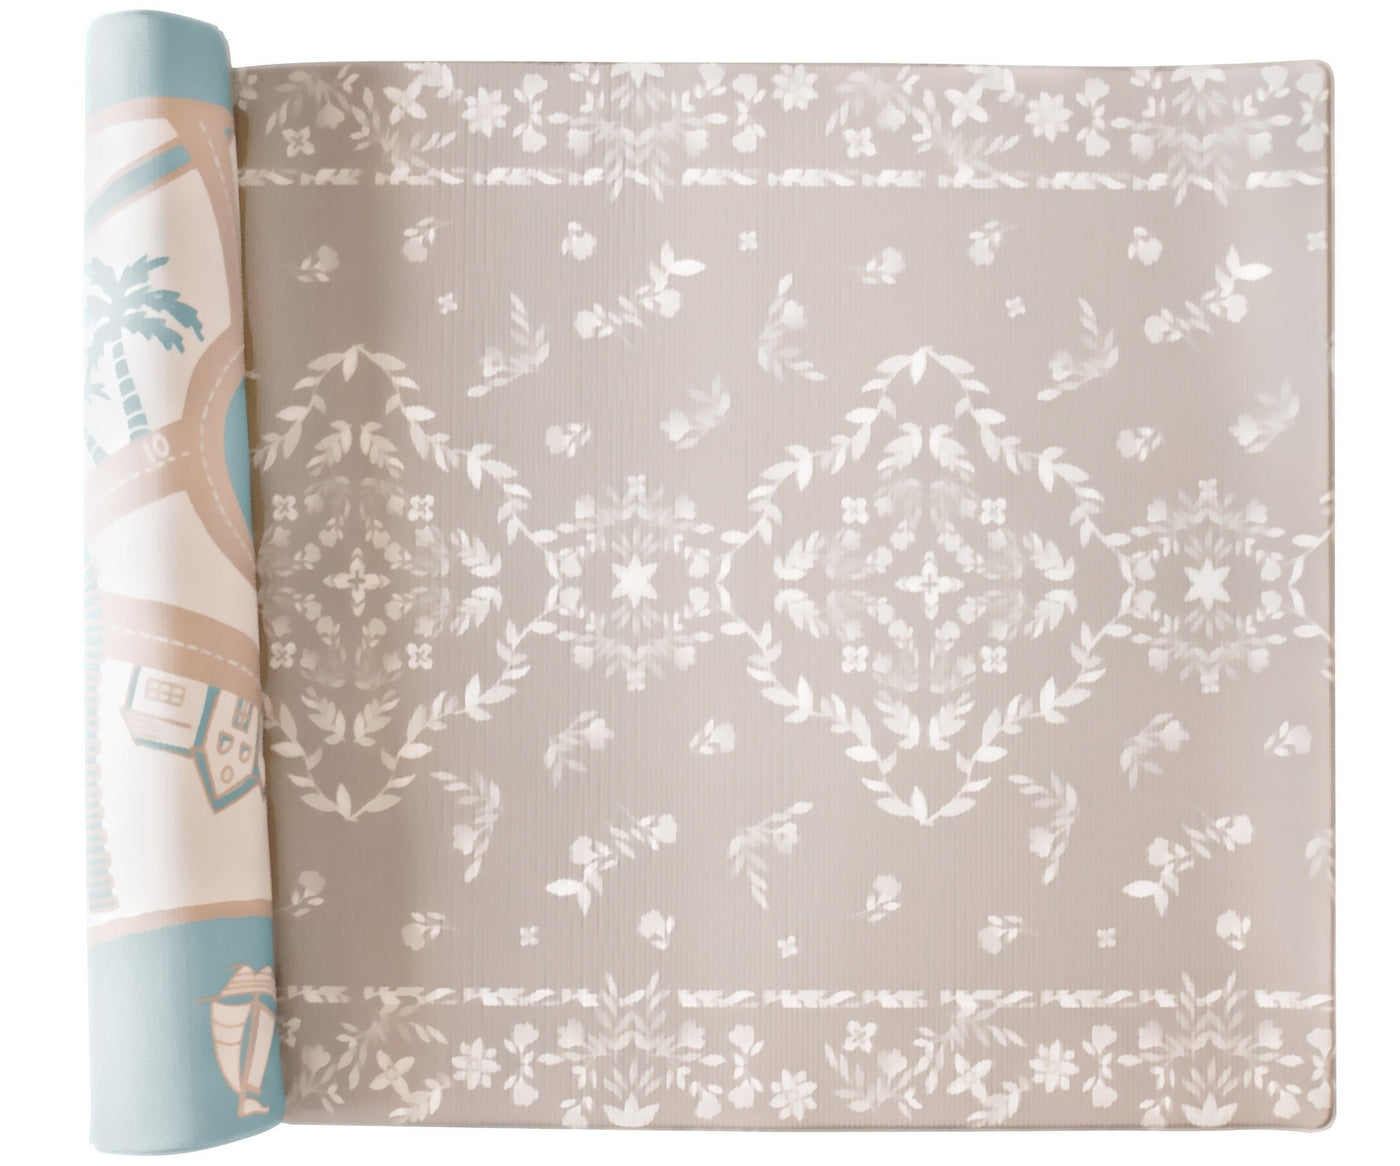 August Rose Sand Playmat - For Home and Play